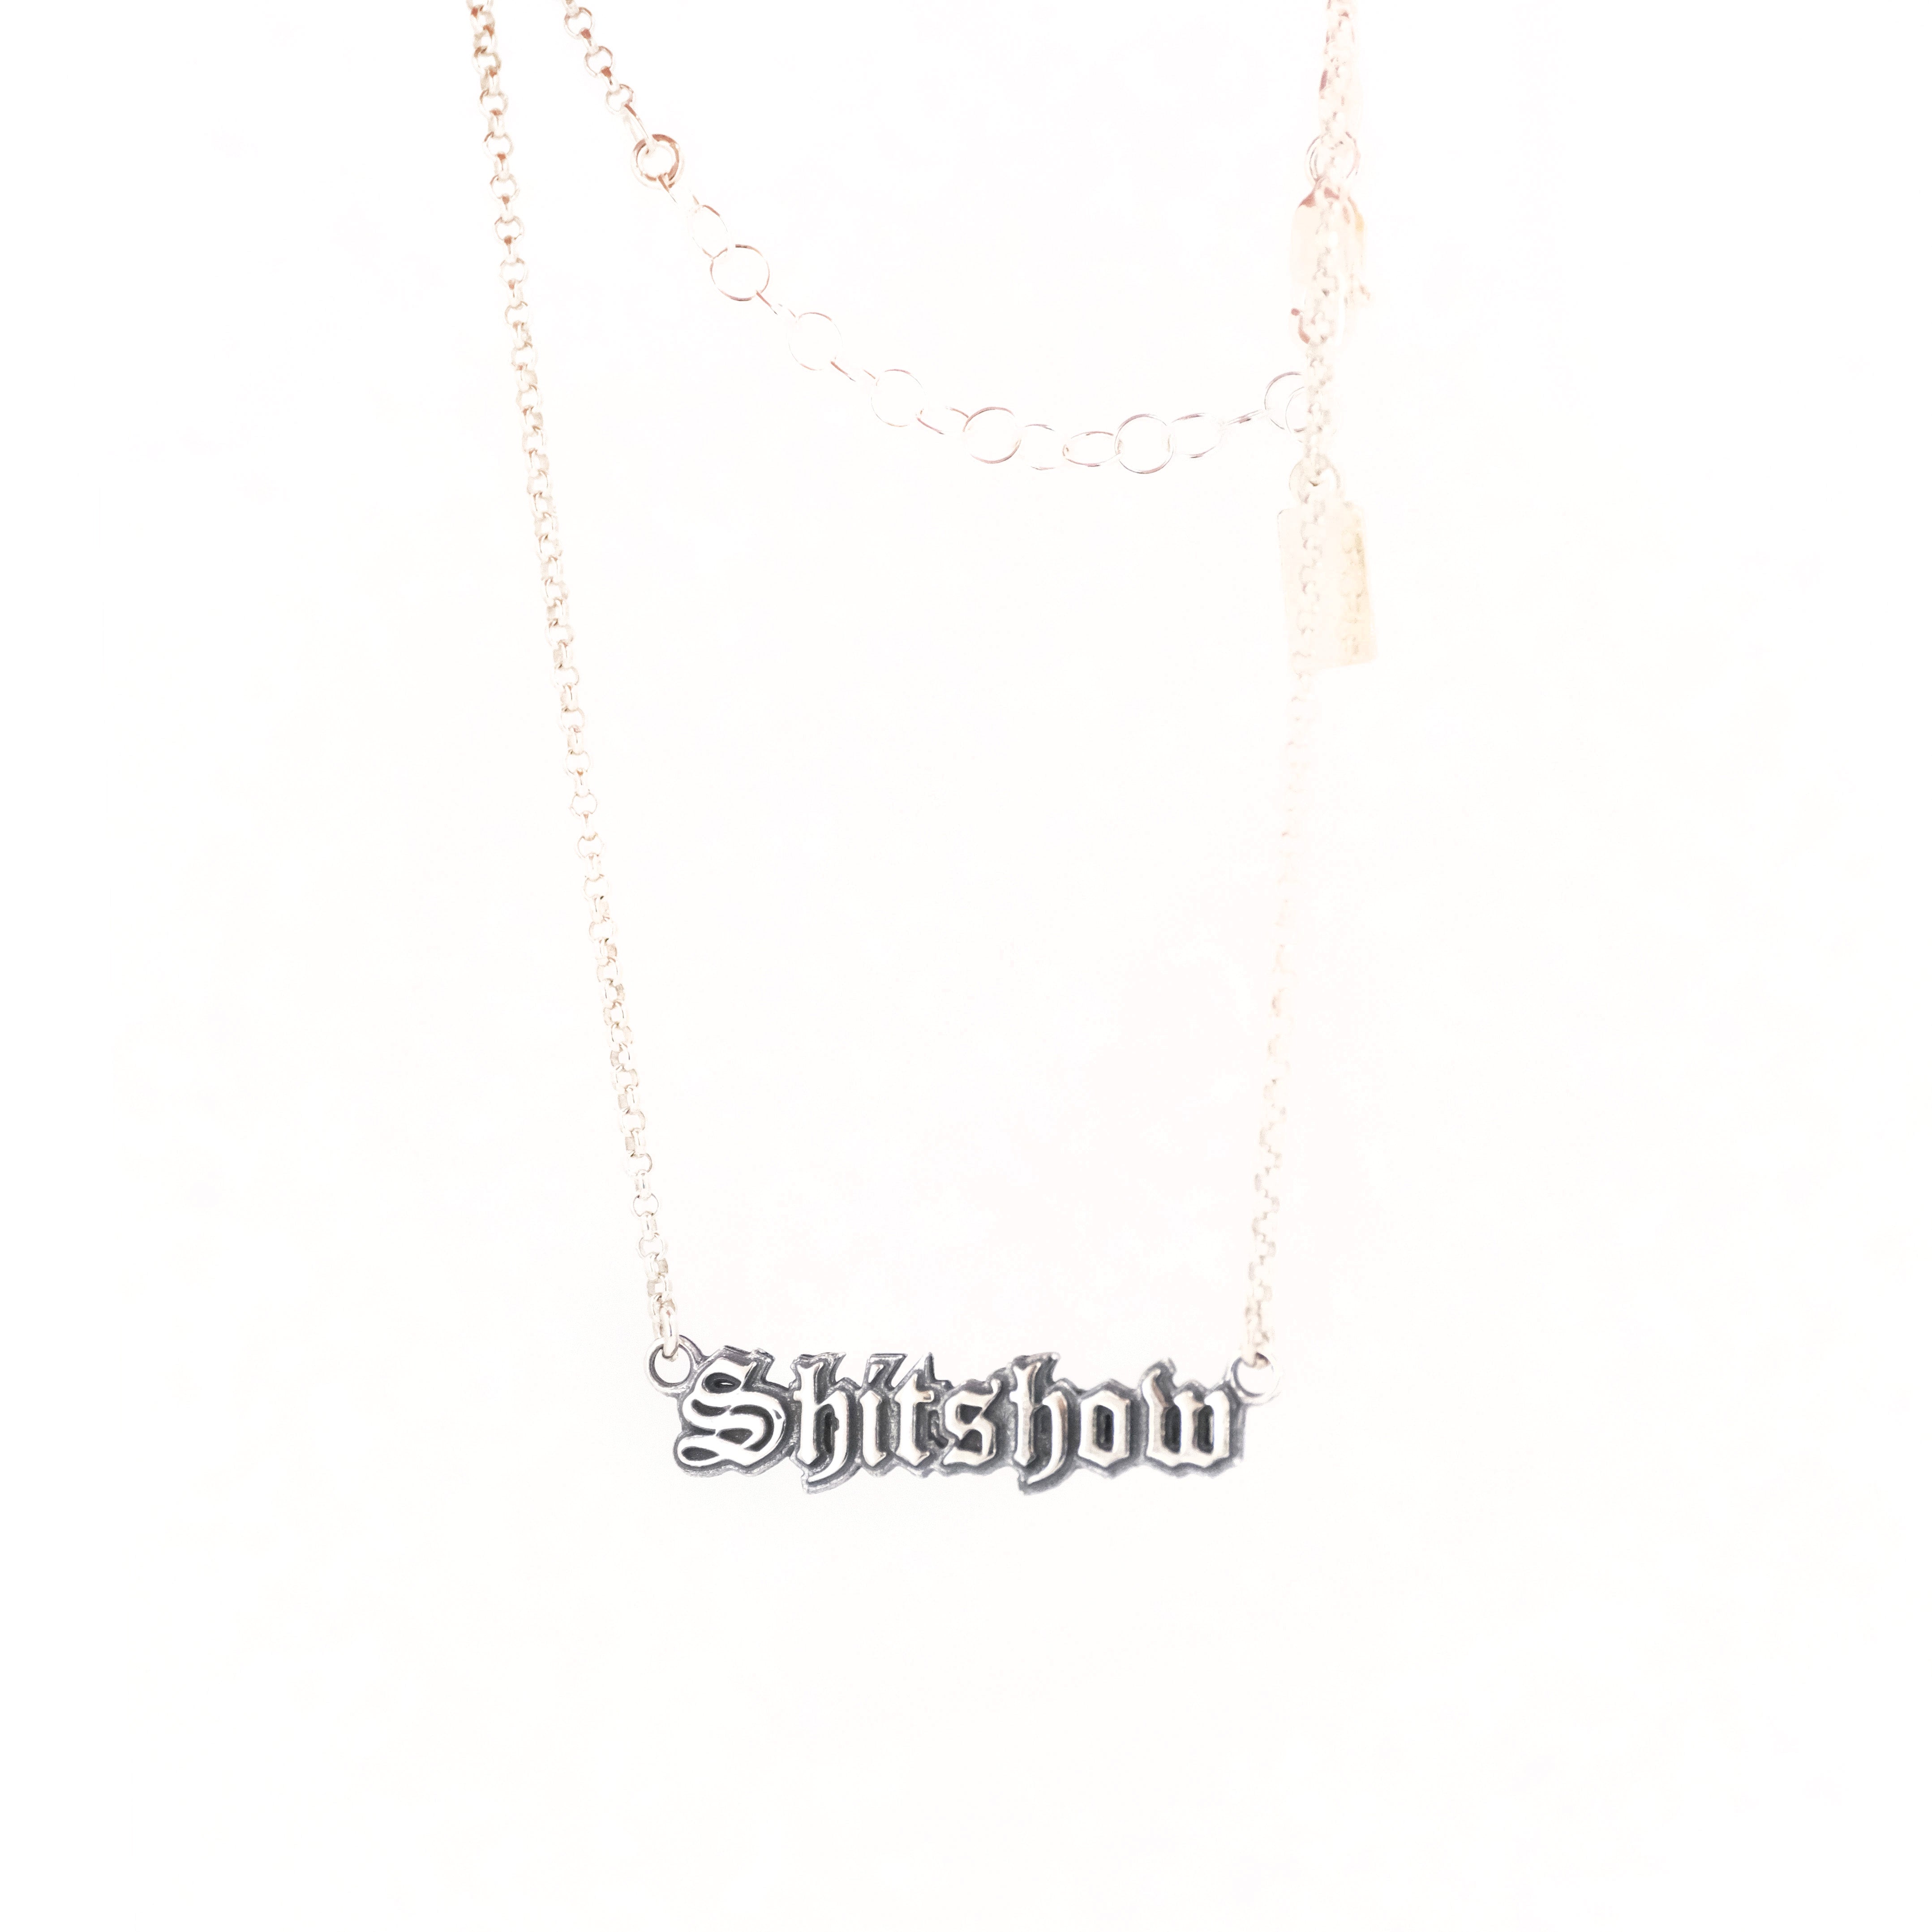 Sterling Shitshow Necklace